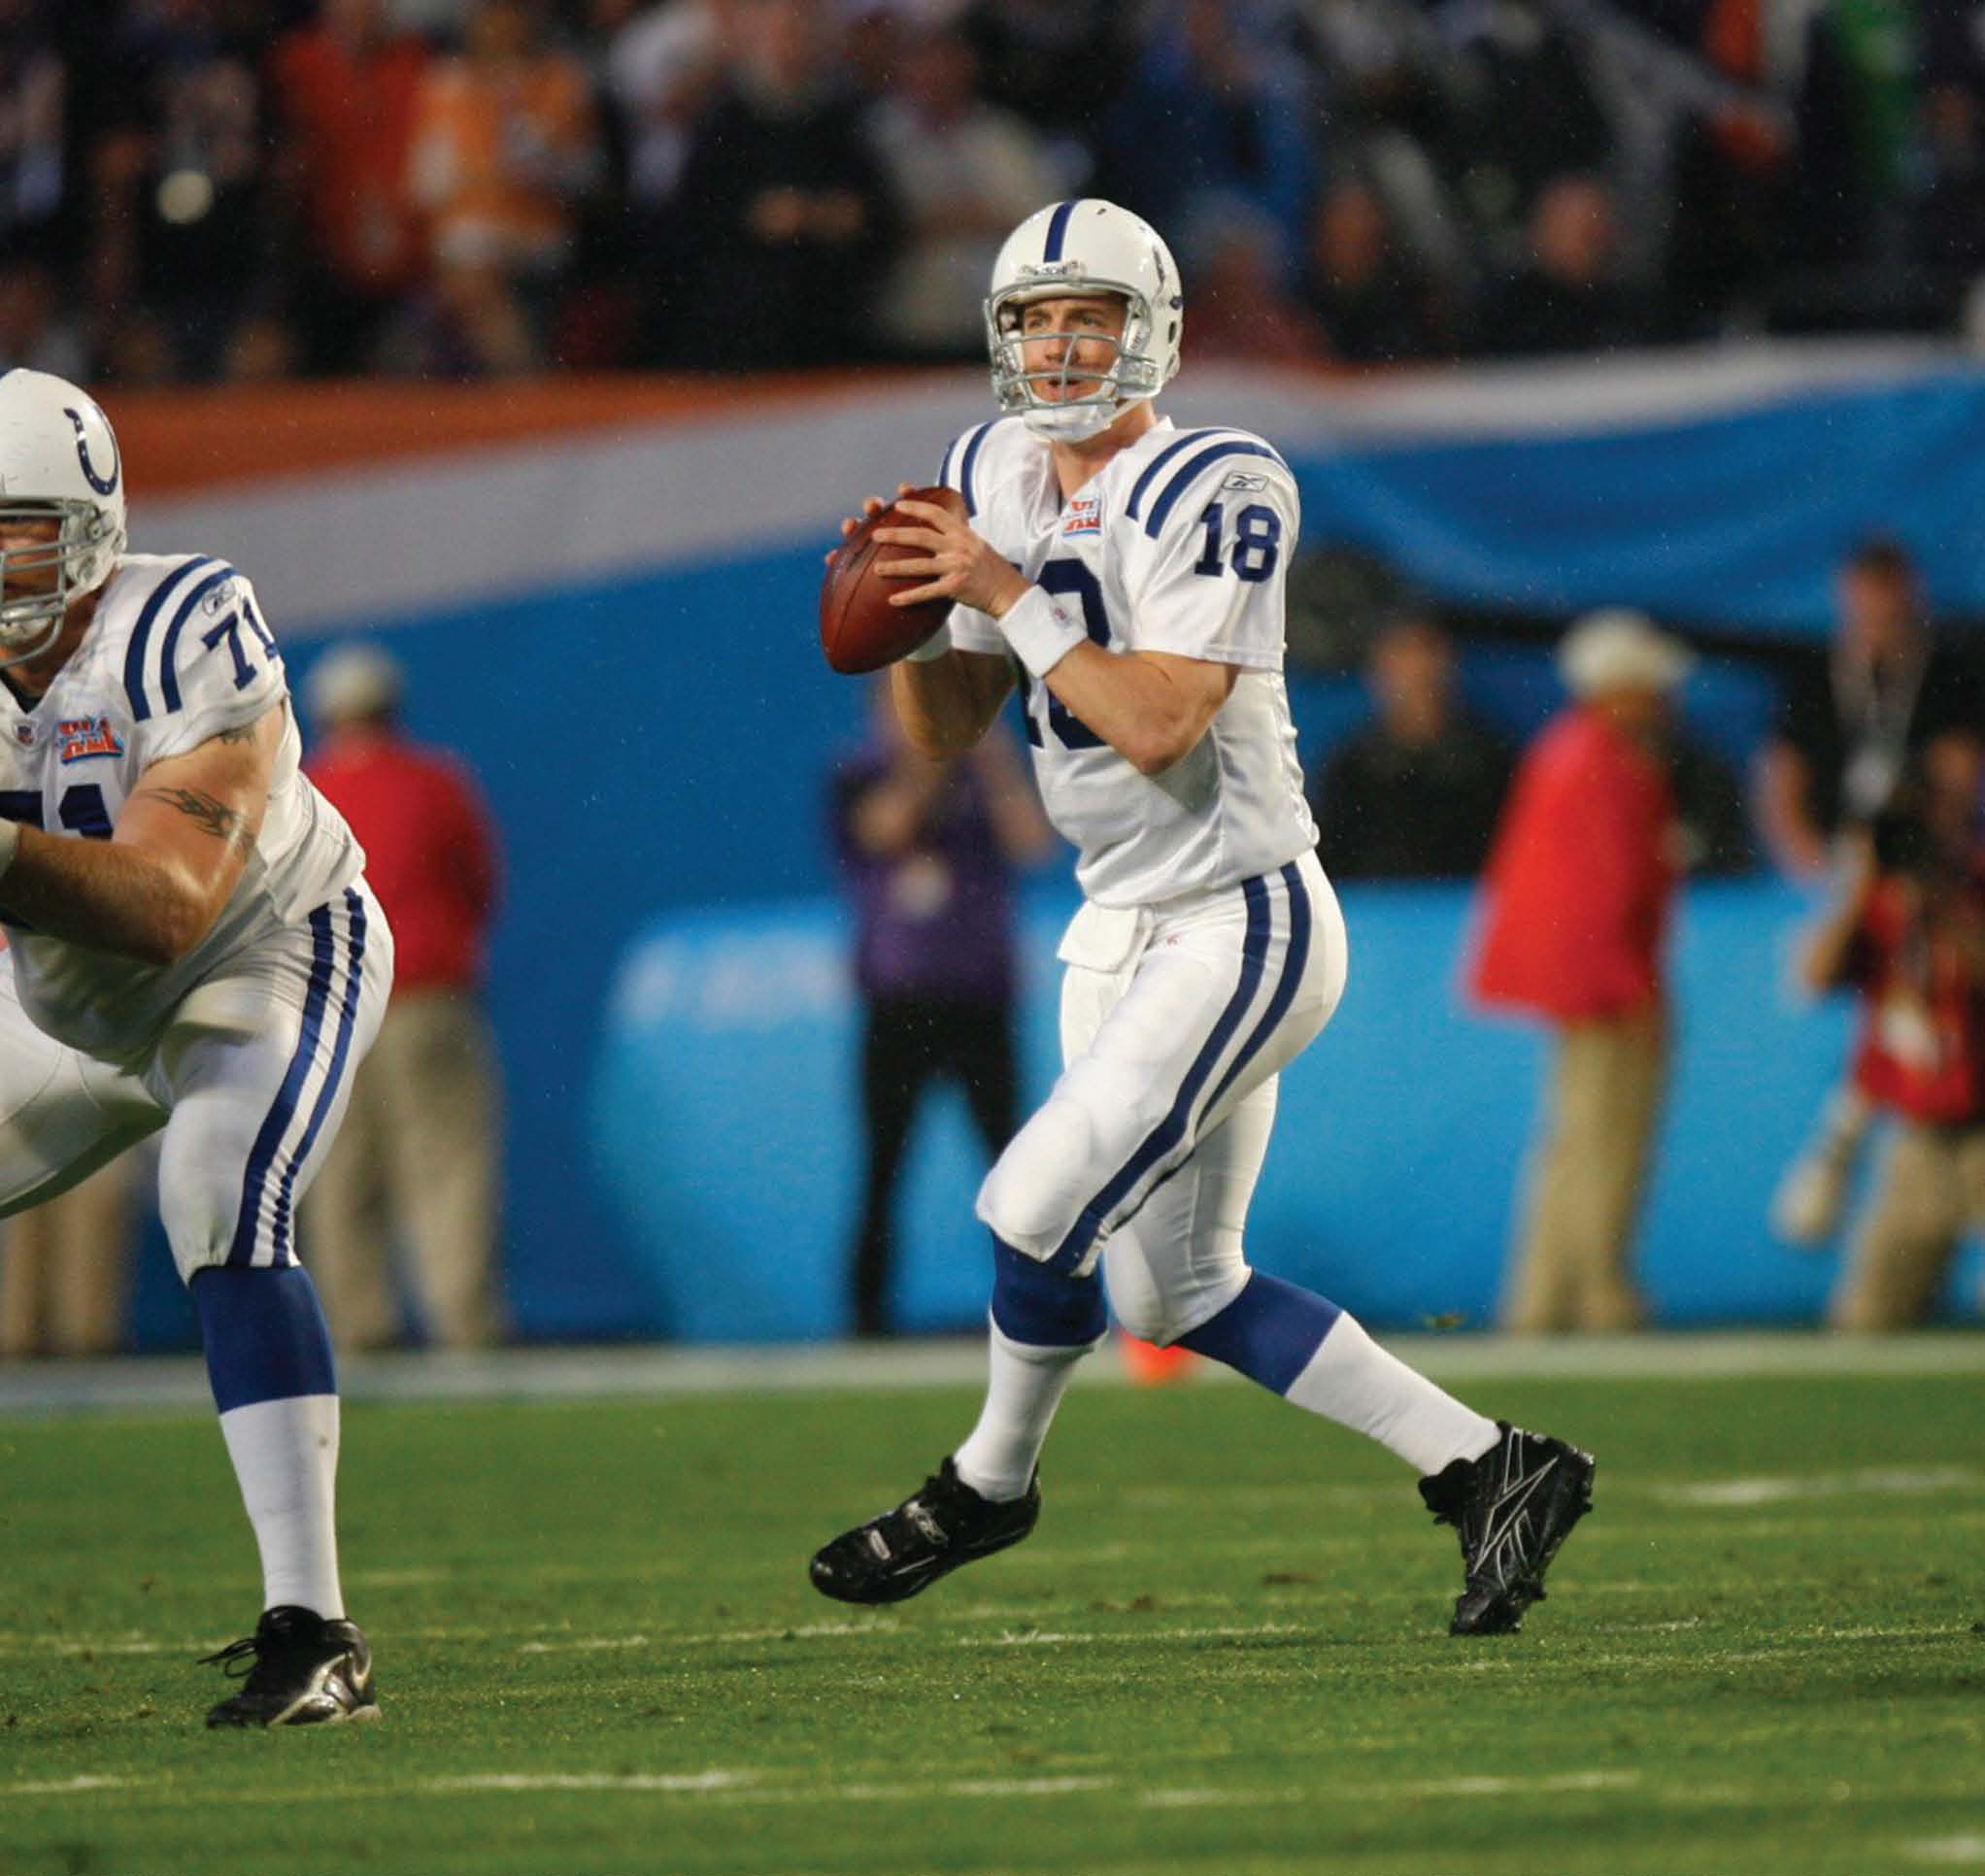 Peyton Manning led the Indianapolis Colts to defeat the Chicago Bears and win - photo 6